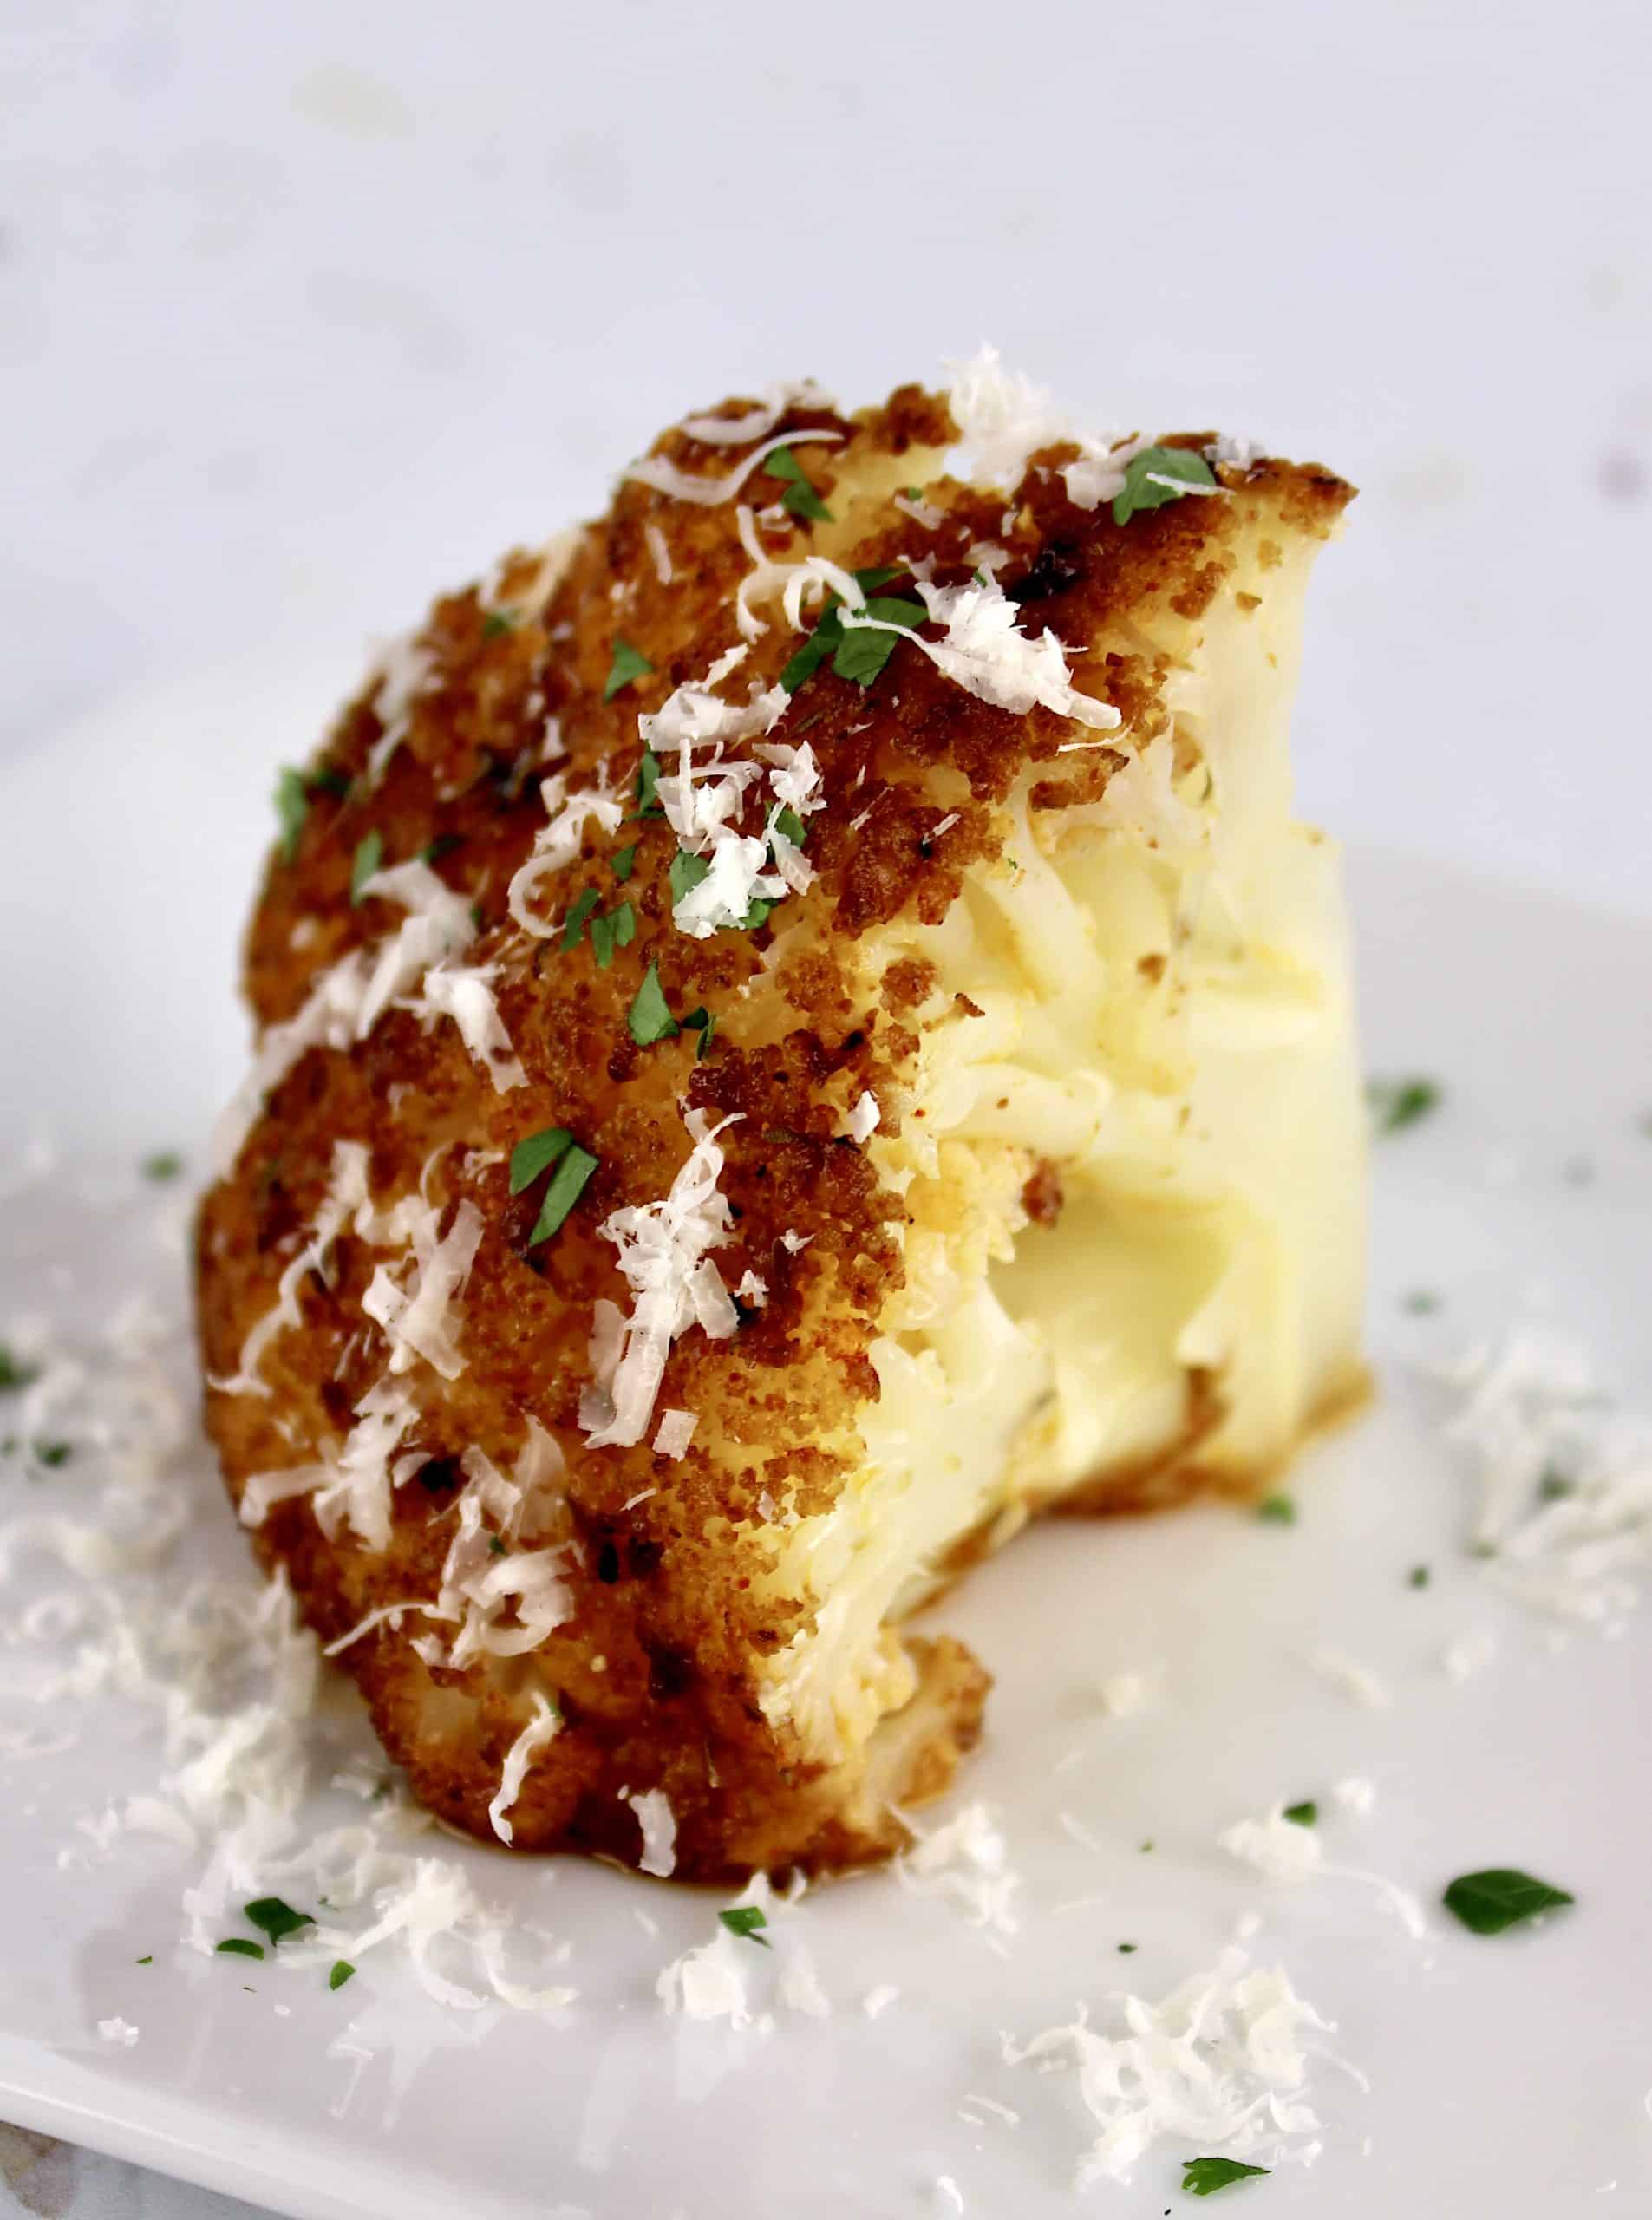 wedge of Whole Roasted Cauliflower on white plate with grated parmesan